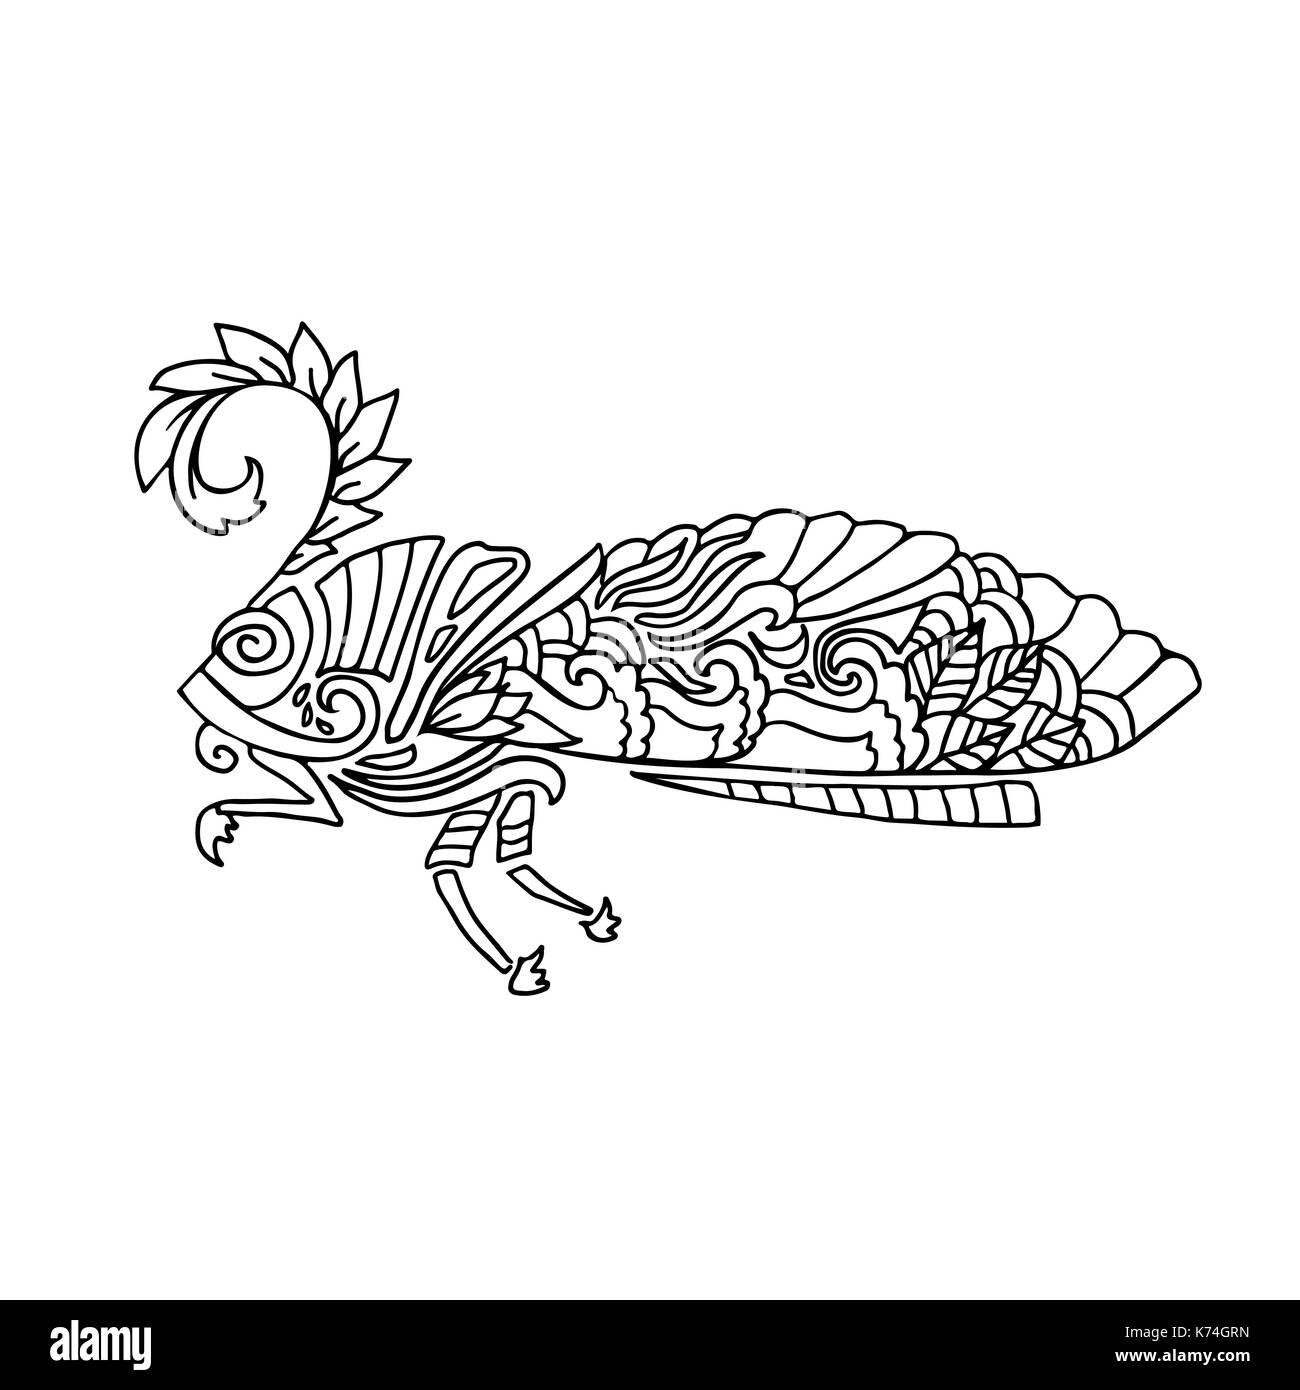 Black and wite moth with ethnic floral ornaments for adult coloring book. Zentagle pattern. Vector doodle illustration. Night-fly moth. Stock Vector